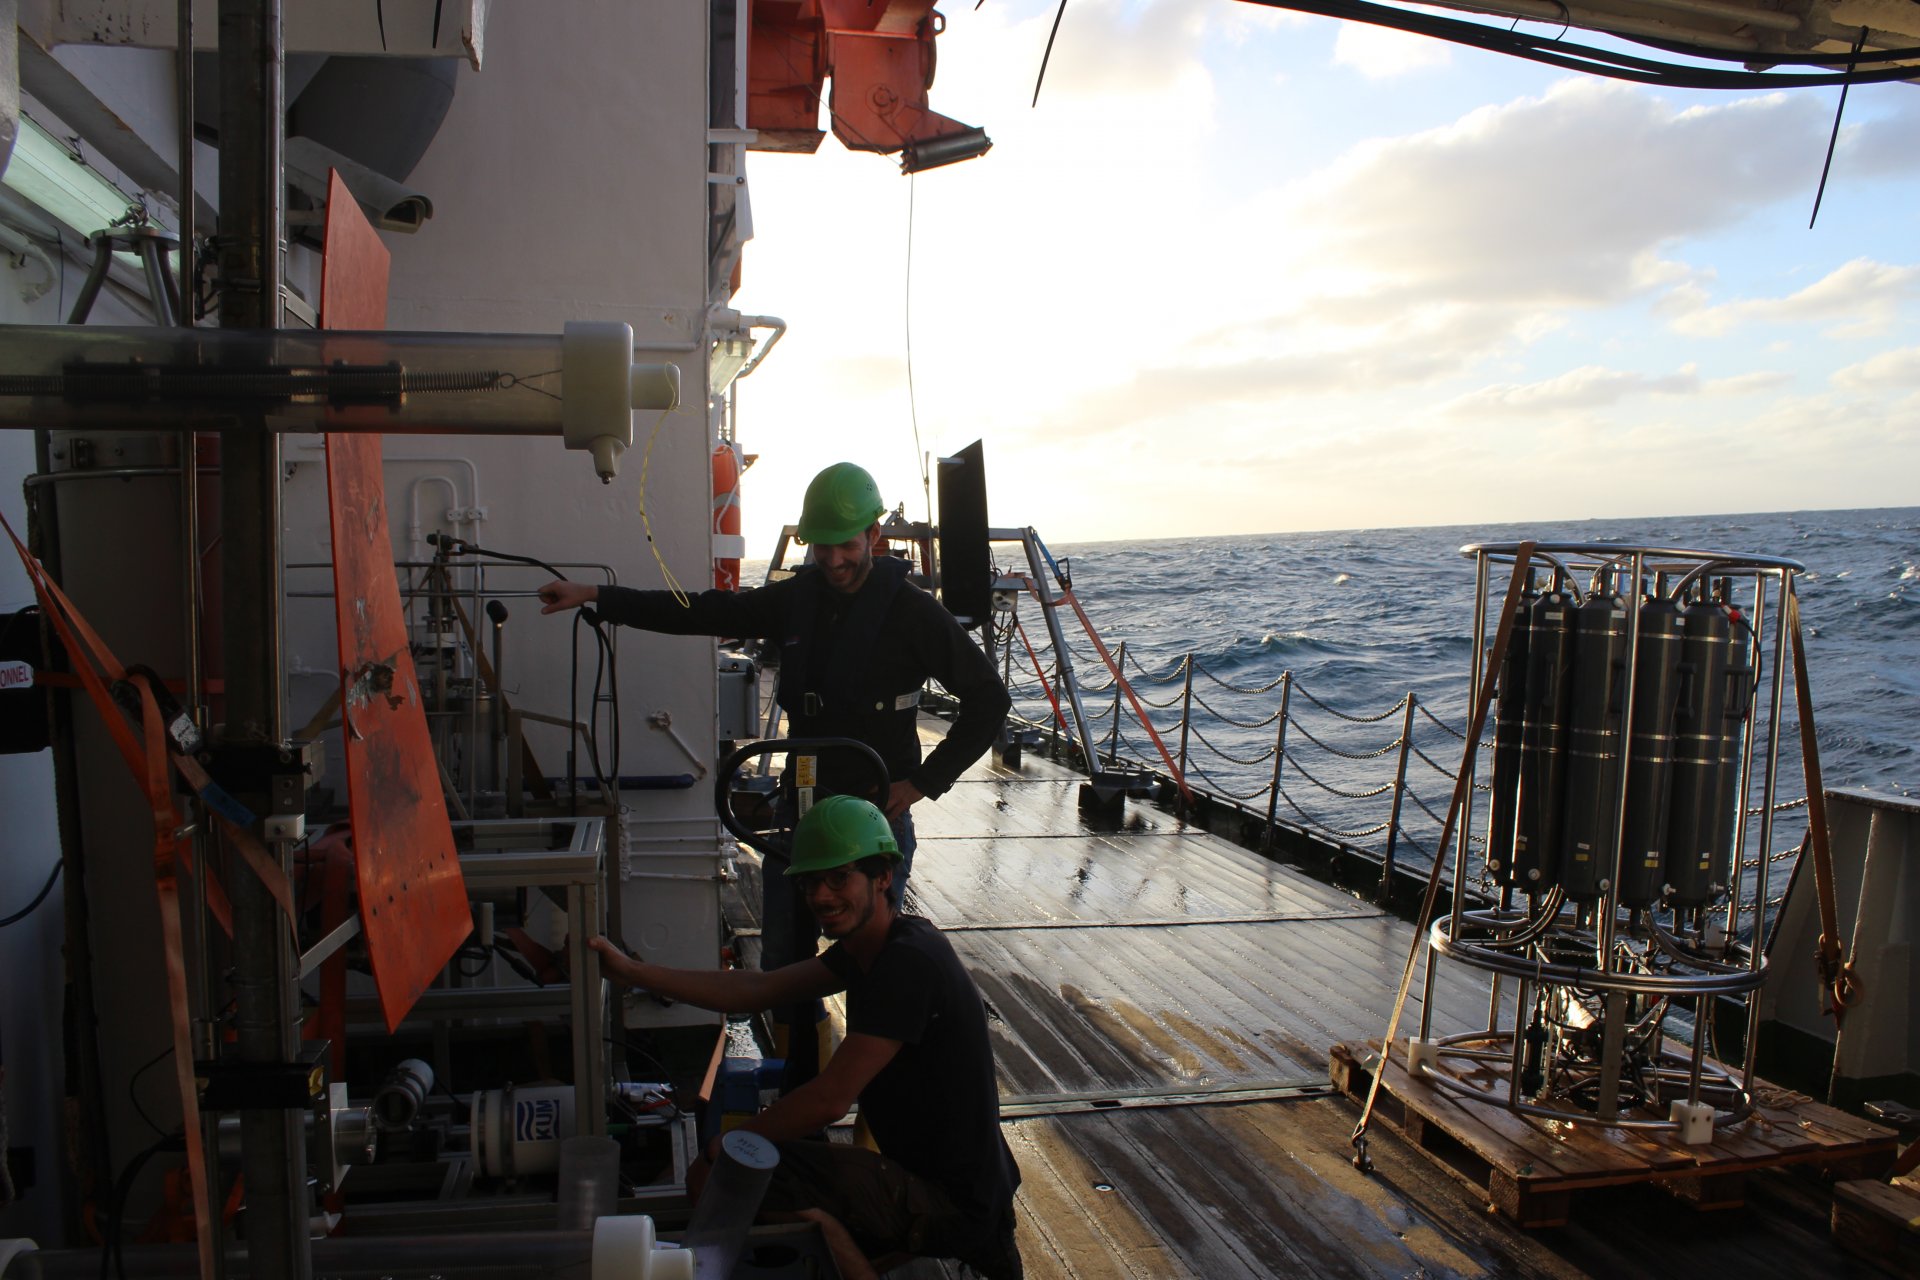 Steffen and Soeren are preparing a camera on the deck of the Poseidon, which takes underwater pictures of zooplankton and particles. (© Max Planck Institute for Marine Microbiology)